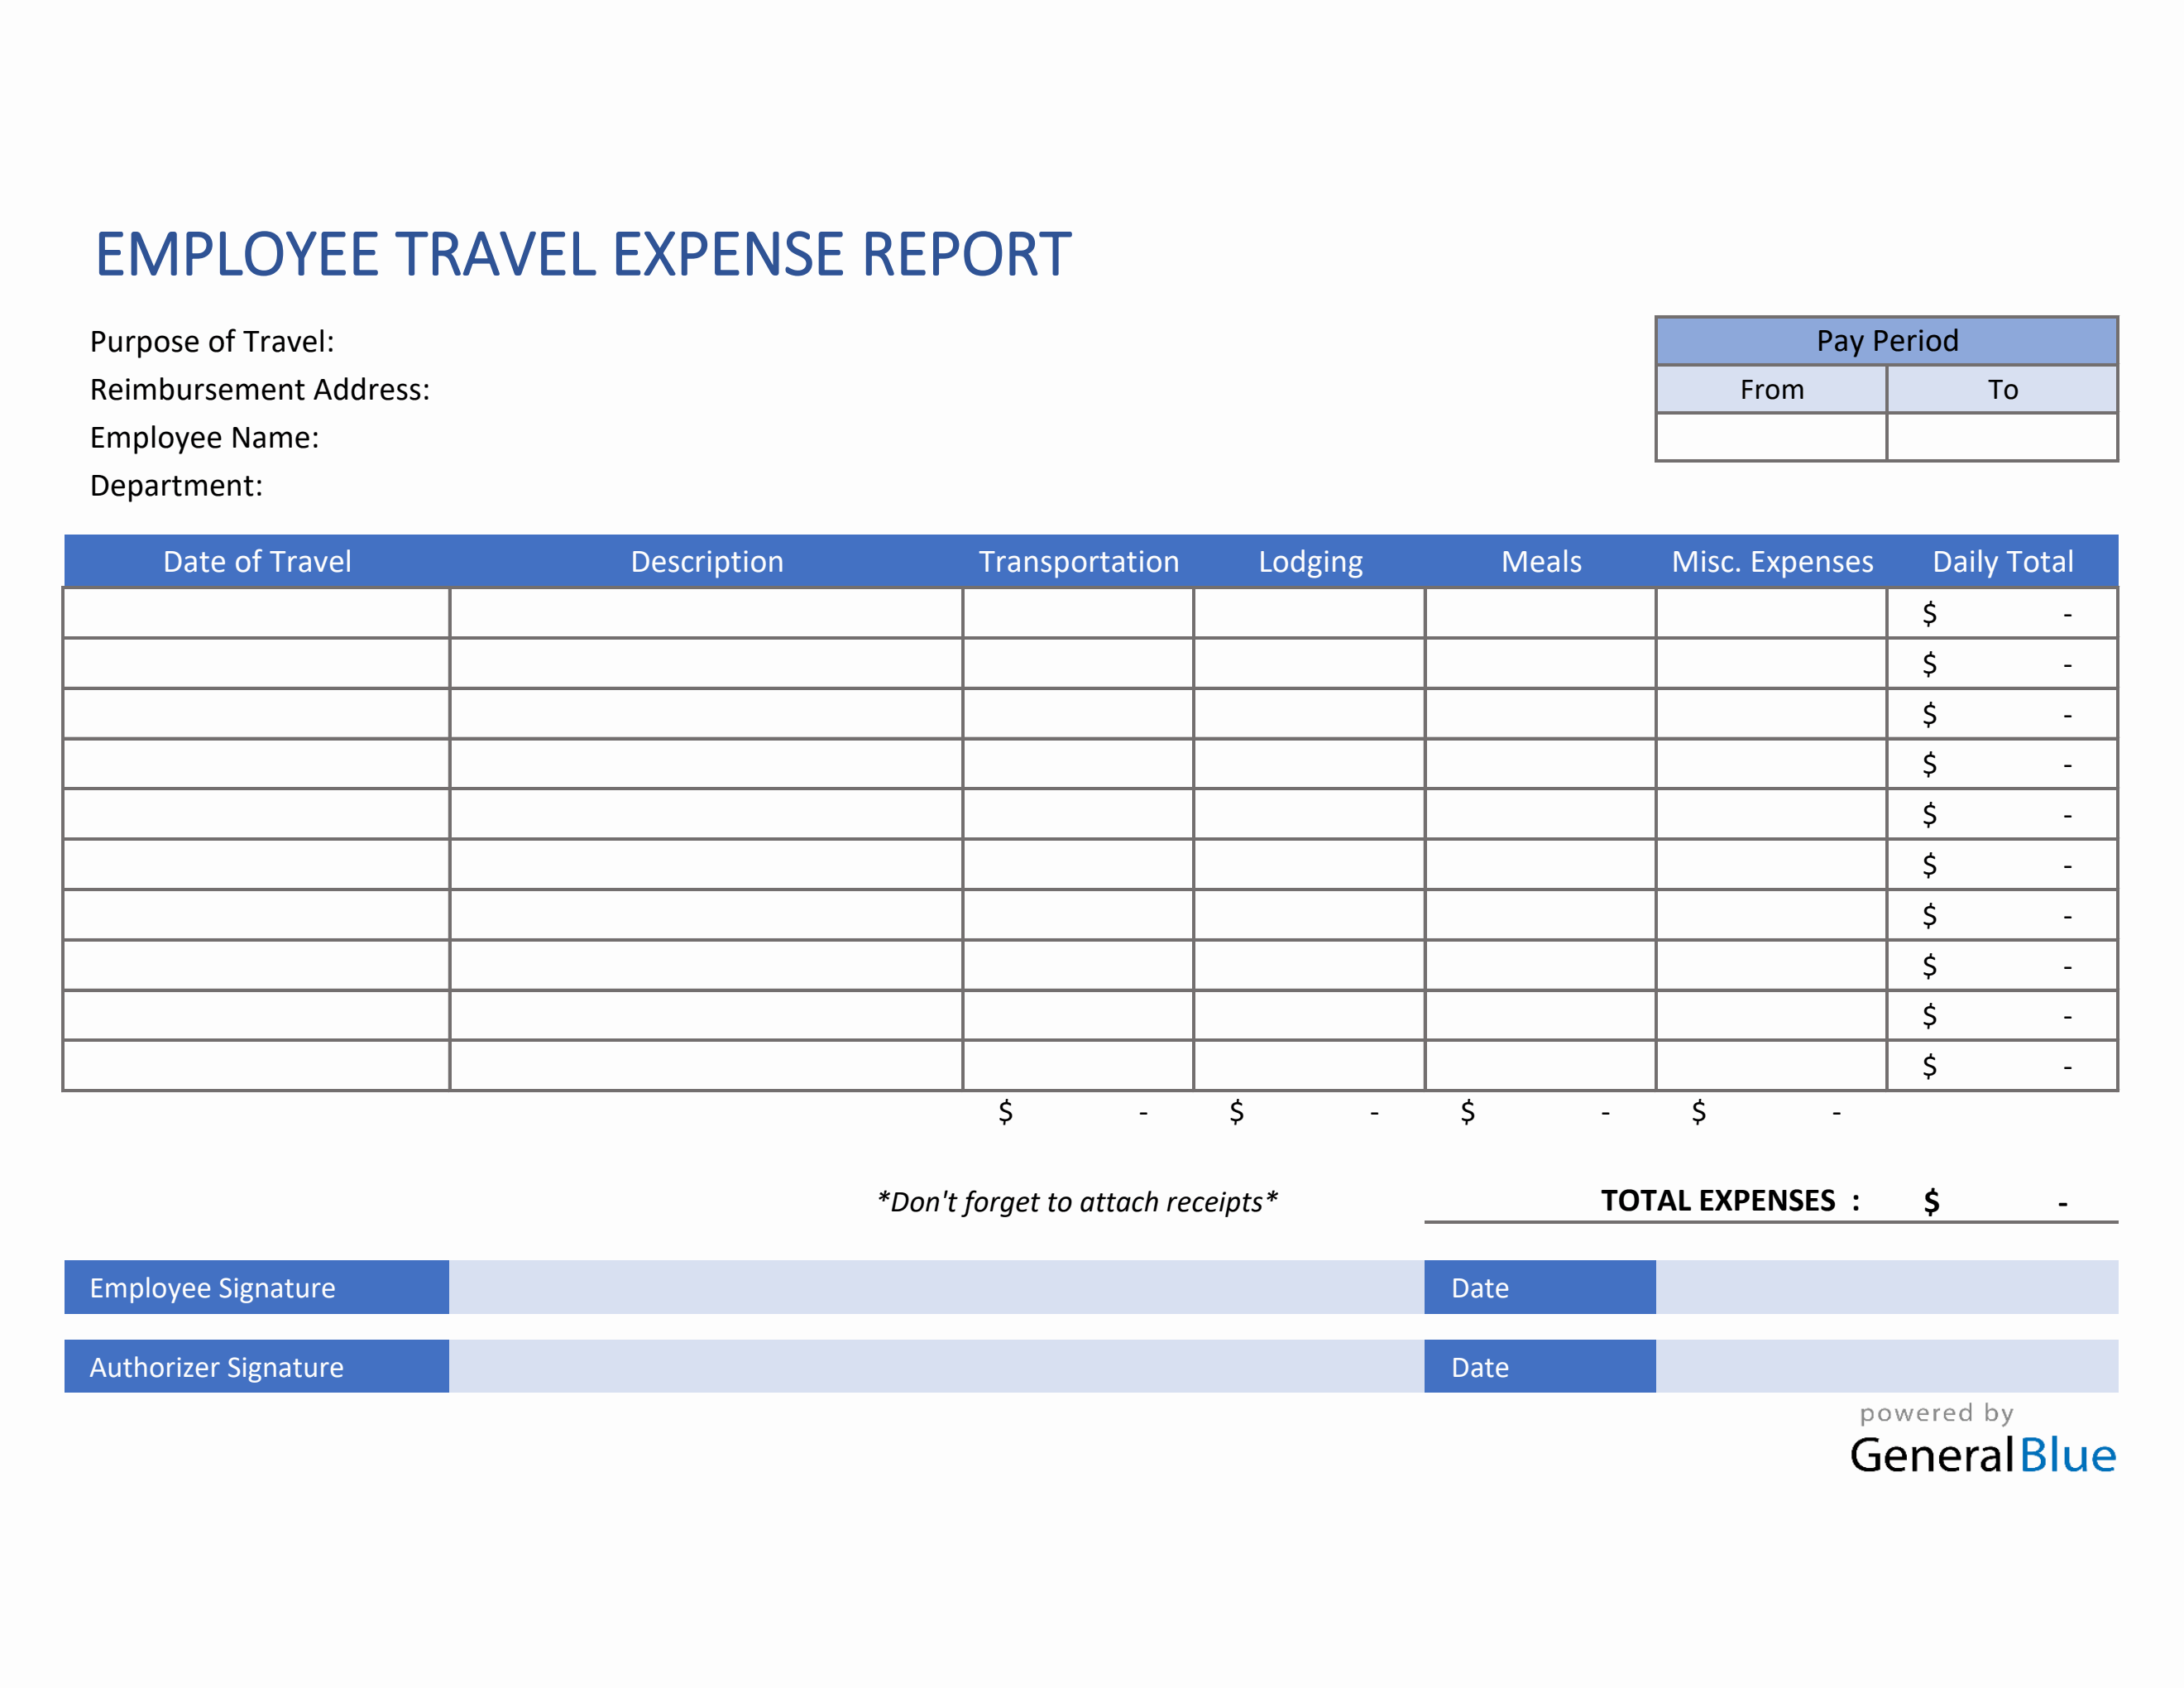 Employee Travel Expense Report Template in Excel Regarding Business Trip Report Template Pdf